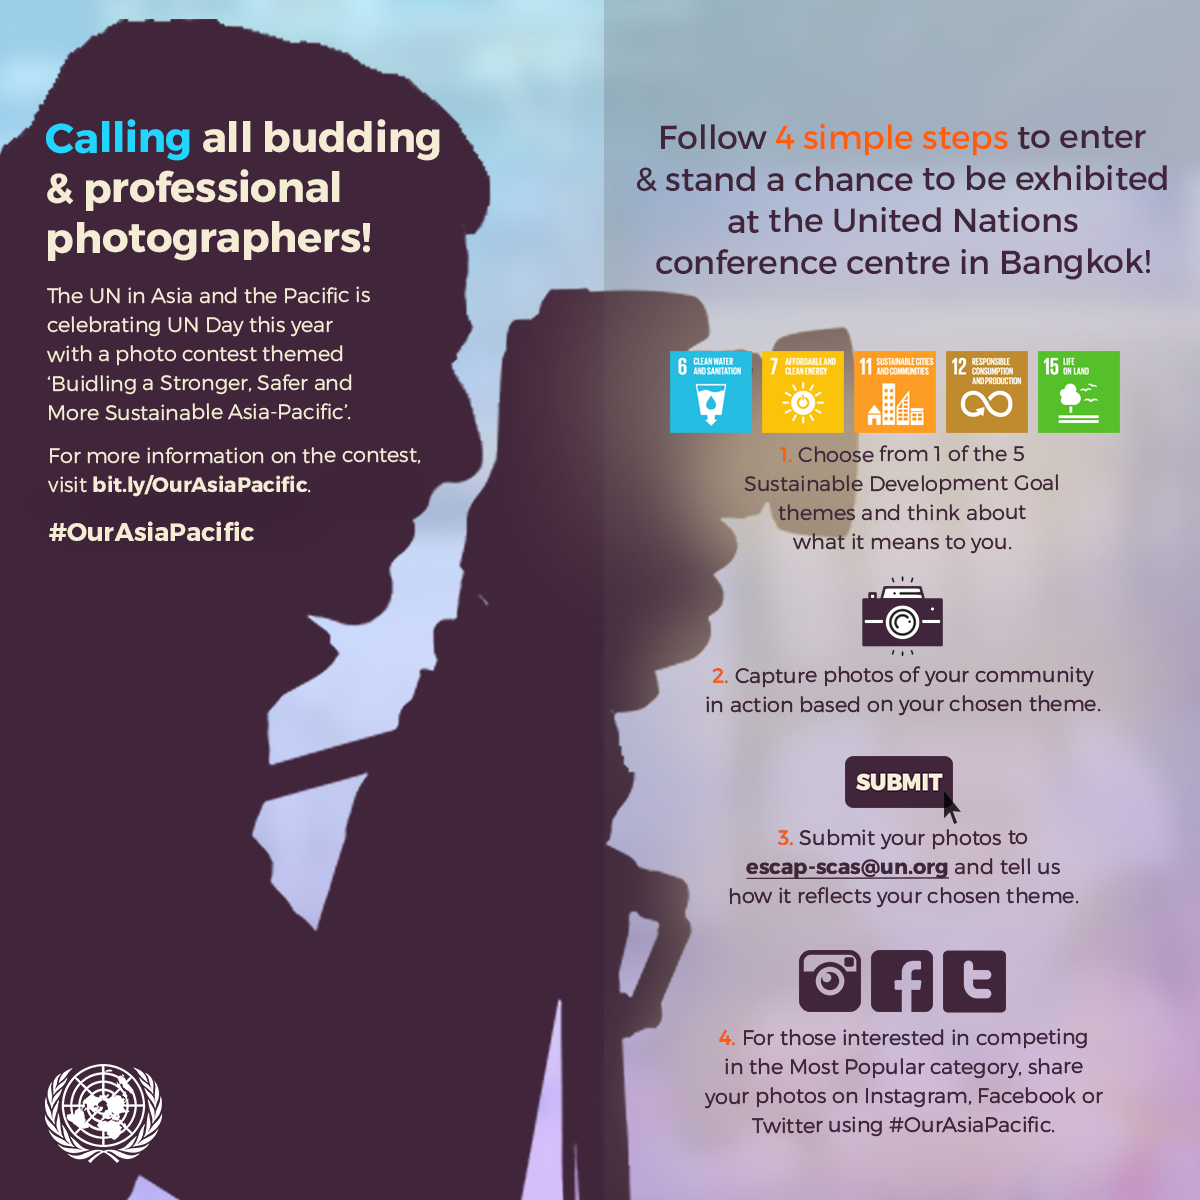 un-escap-is-organizing-a-photo-contest-themed-“building-a-stronger,-safer-and-more-sustainable-asia-pacific-”